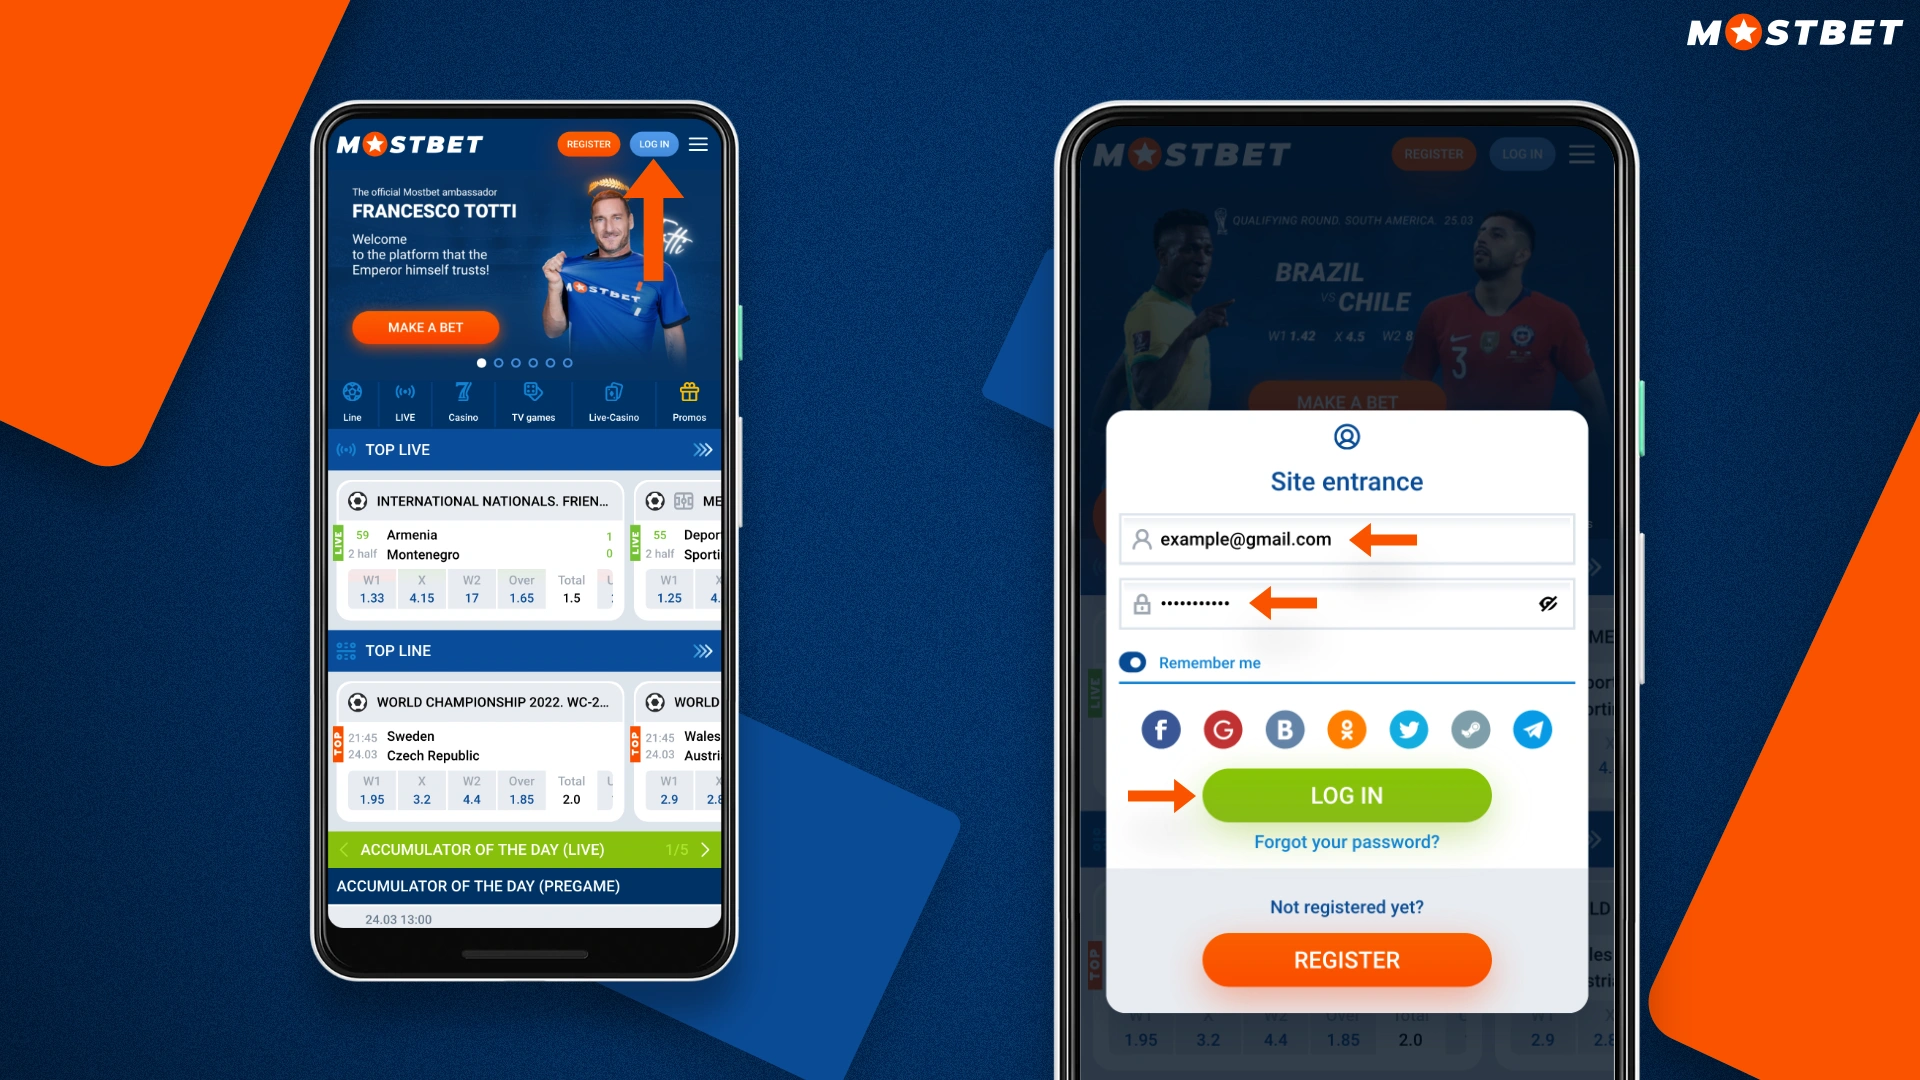 How to sign in and log in to your Mostbet account from a mobile device